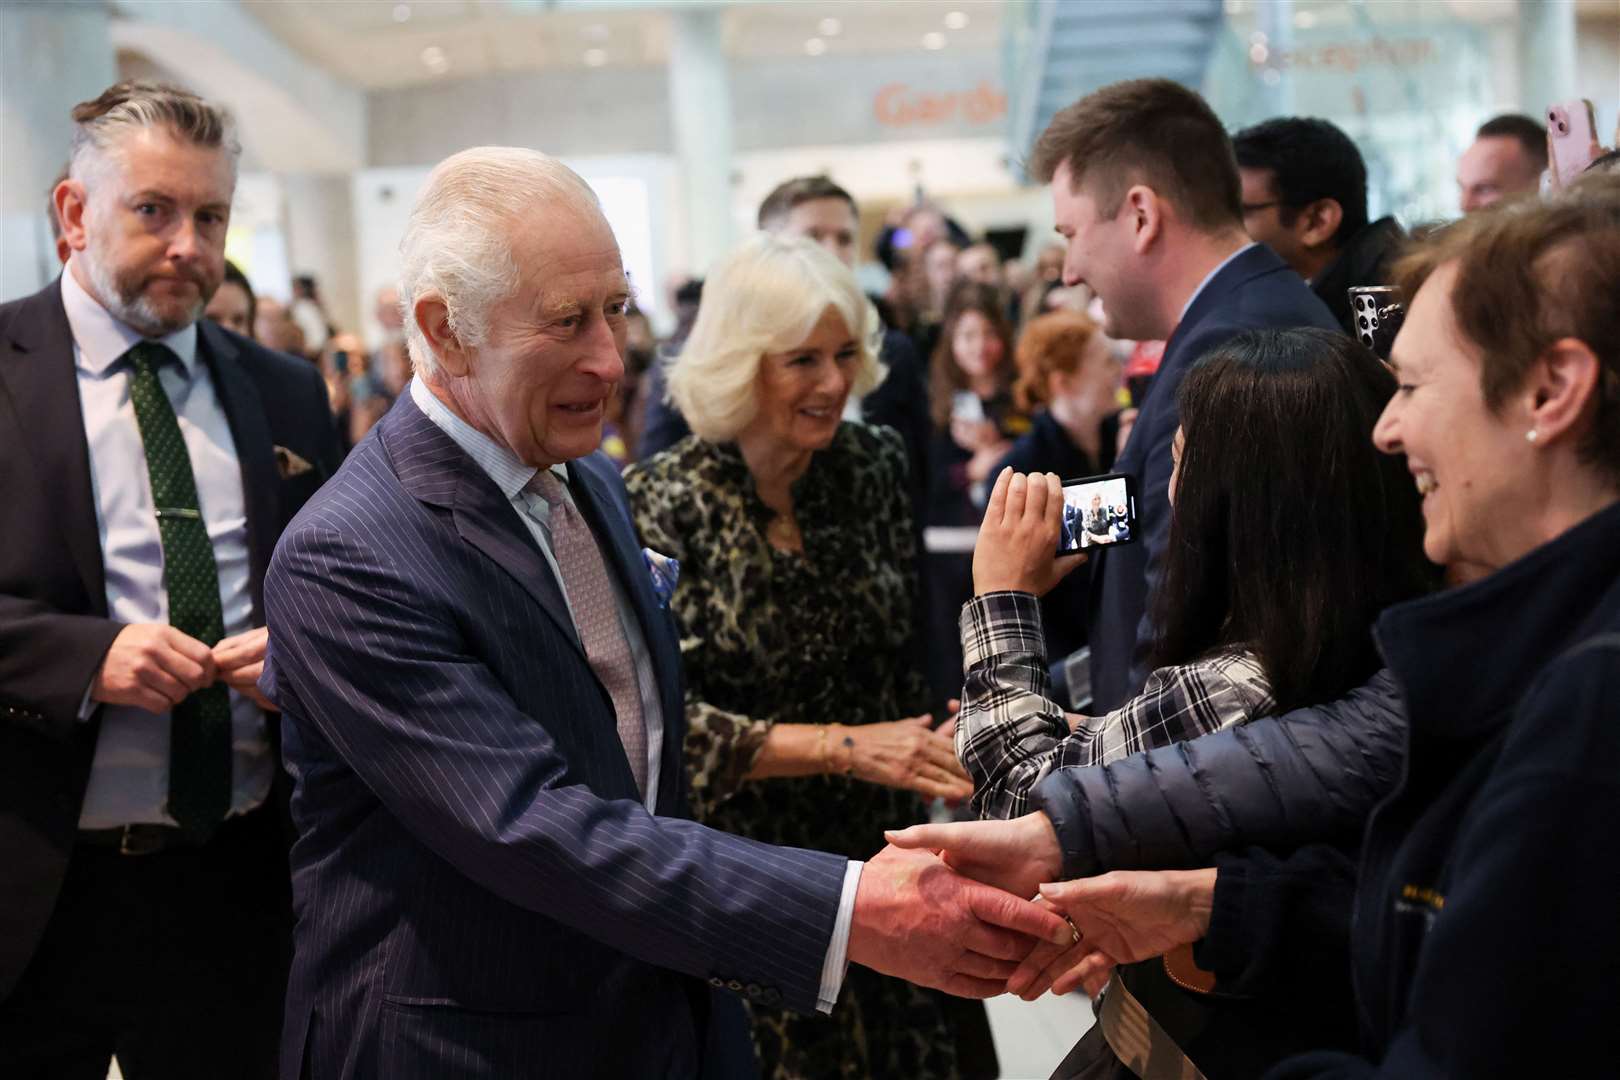 Charles and Camilla meet staff members as they arrive at University College Hospital Macmillan Cancer Centre (Suzanne Plunkett/PA)